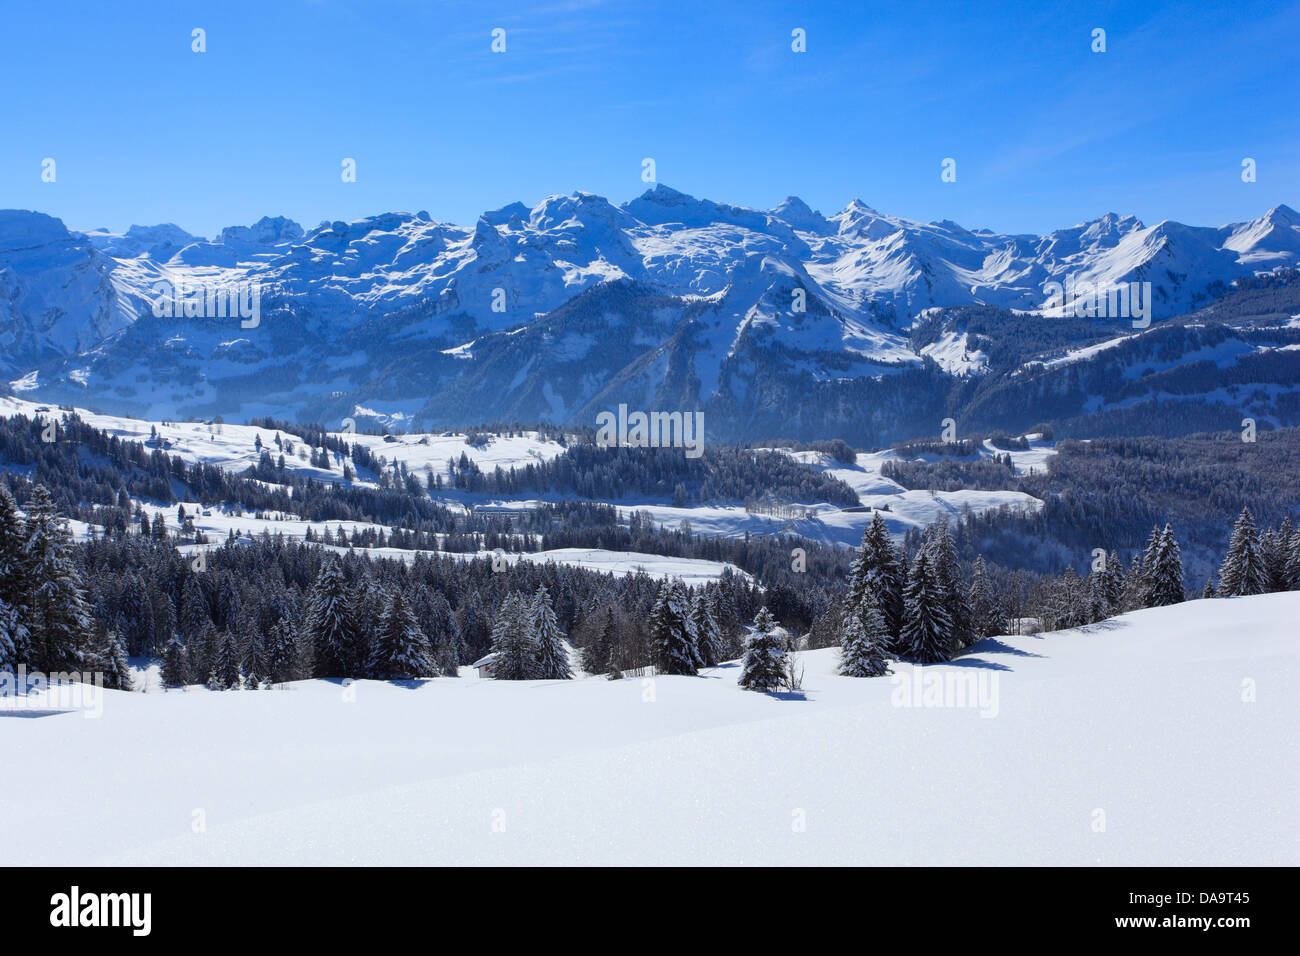 Alps, Alpine wreath, Alpine, panorama, view, mountain, mountains, trees, spruce, spruces, mountains, summits, peaks, Central Swi Stock Photo